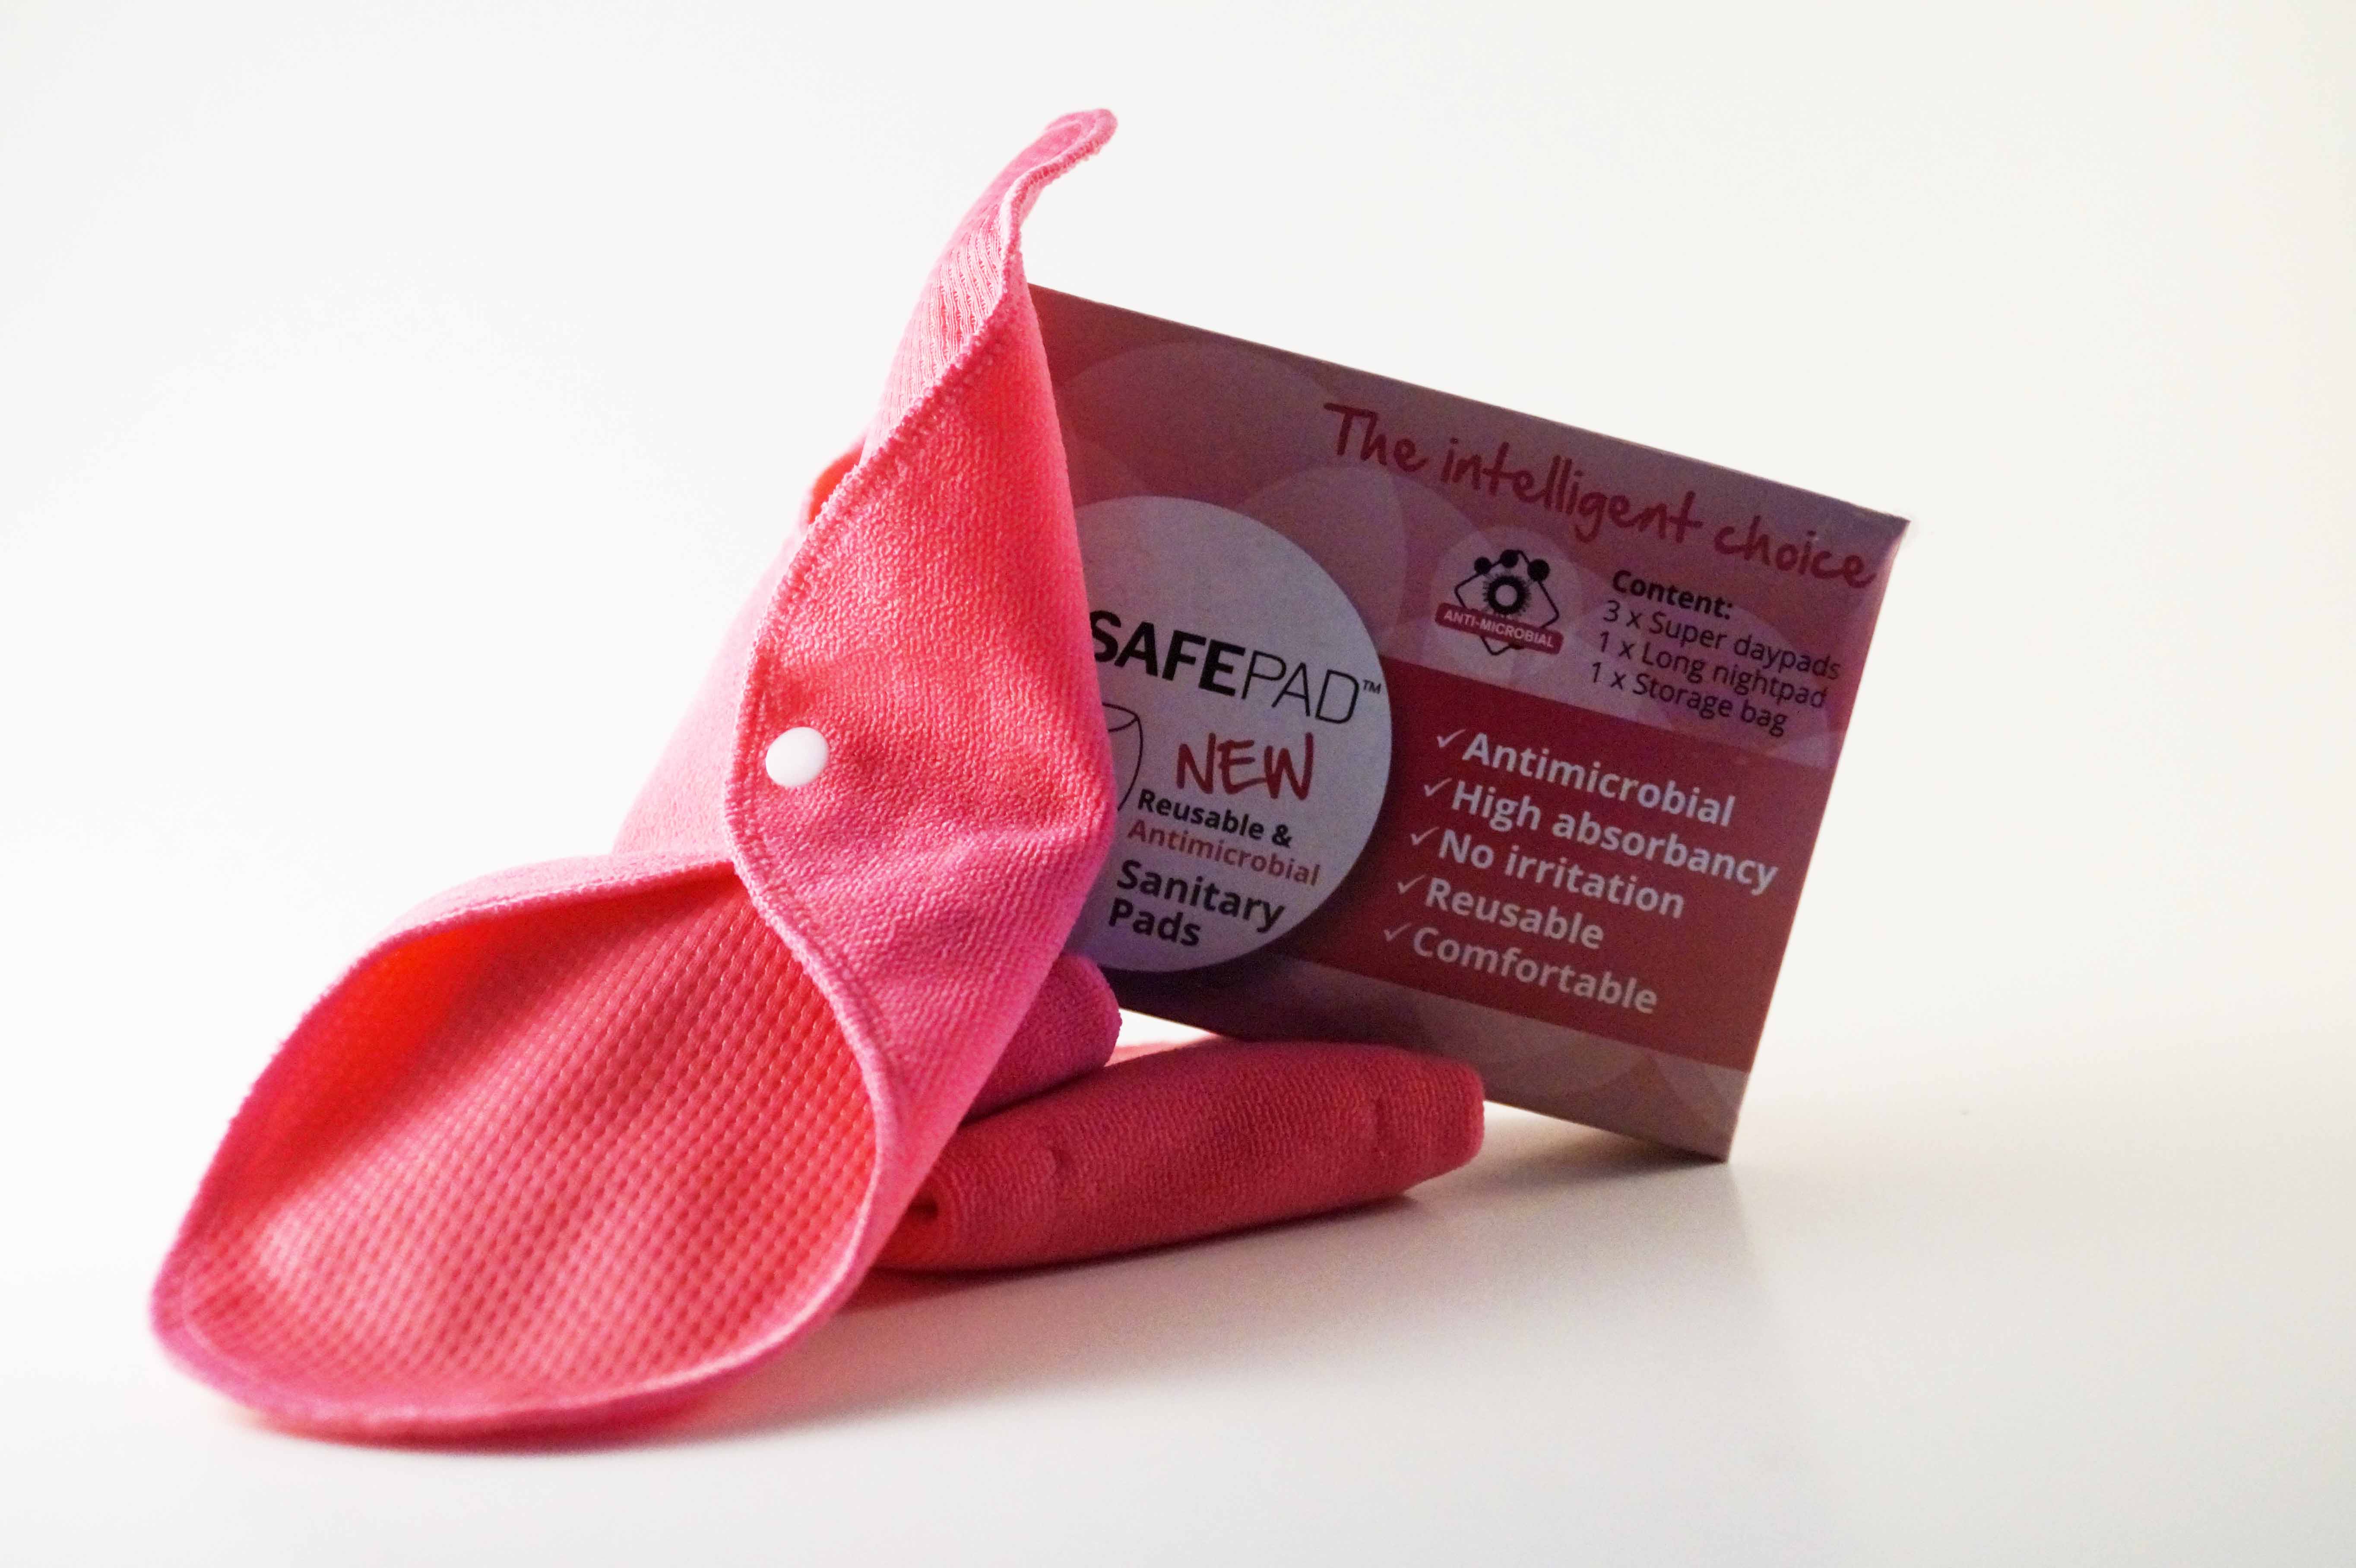 Safepad™ -  a unique reusable sanitary pad with an antimicrobial bonding technology.